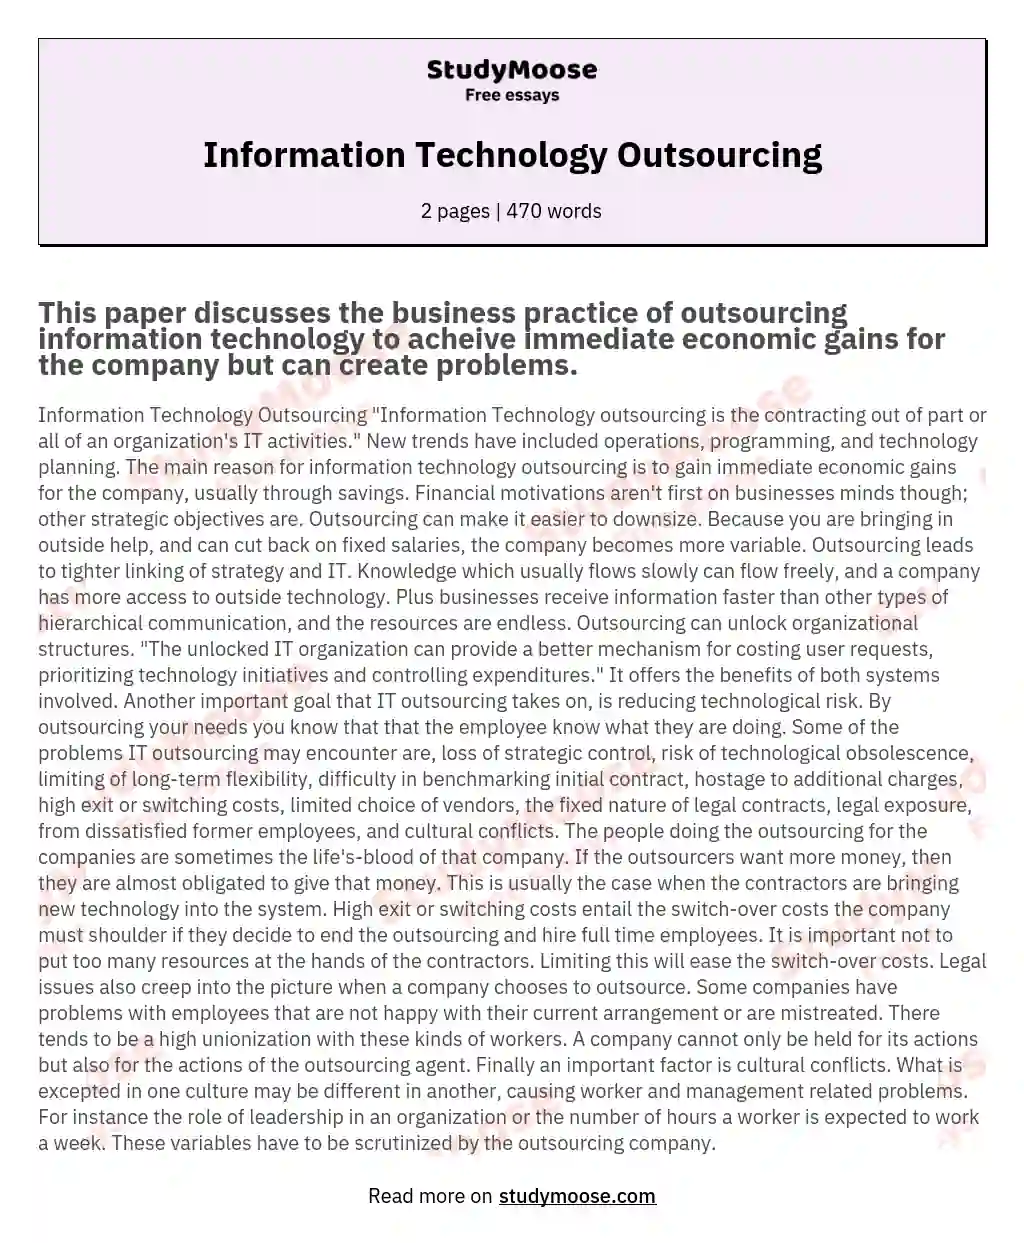 Information Technology Outsourcing essay